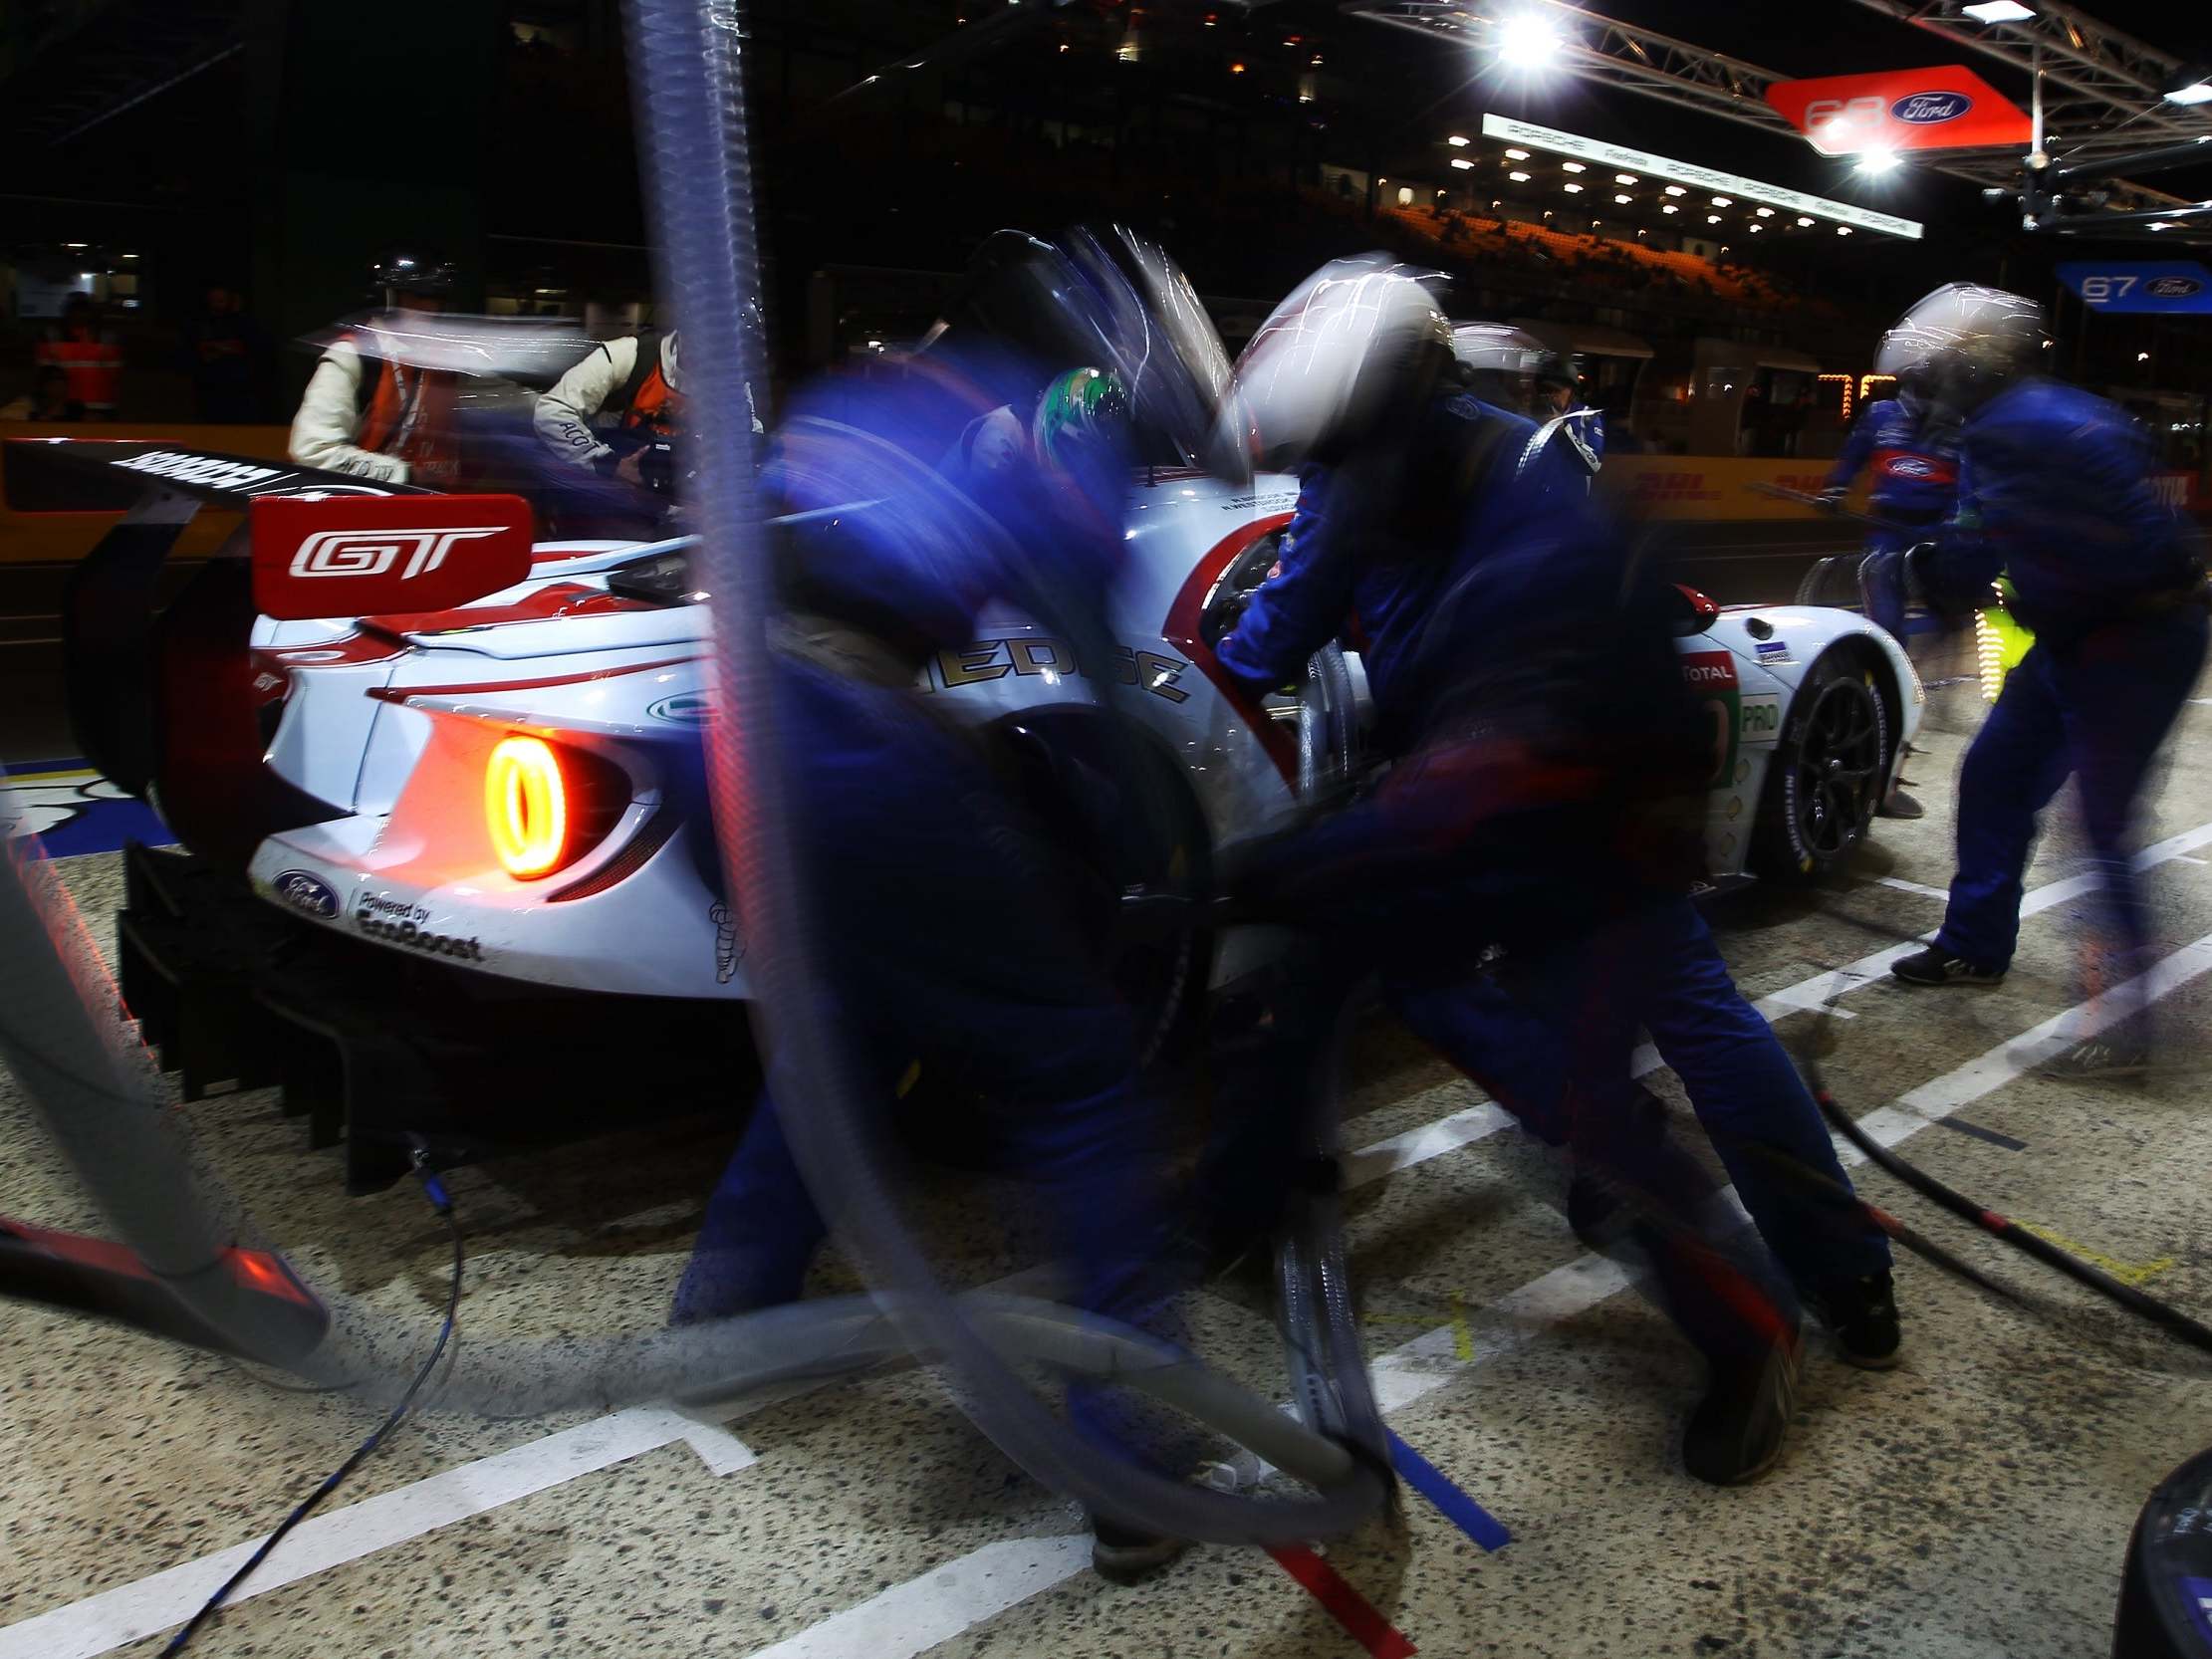 Two Fords were disqualified for refuelling indiscretions